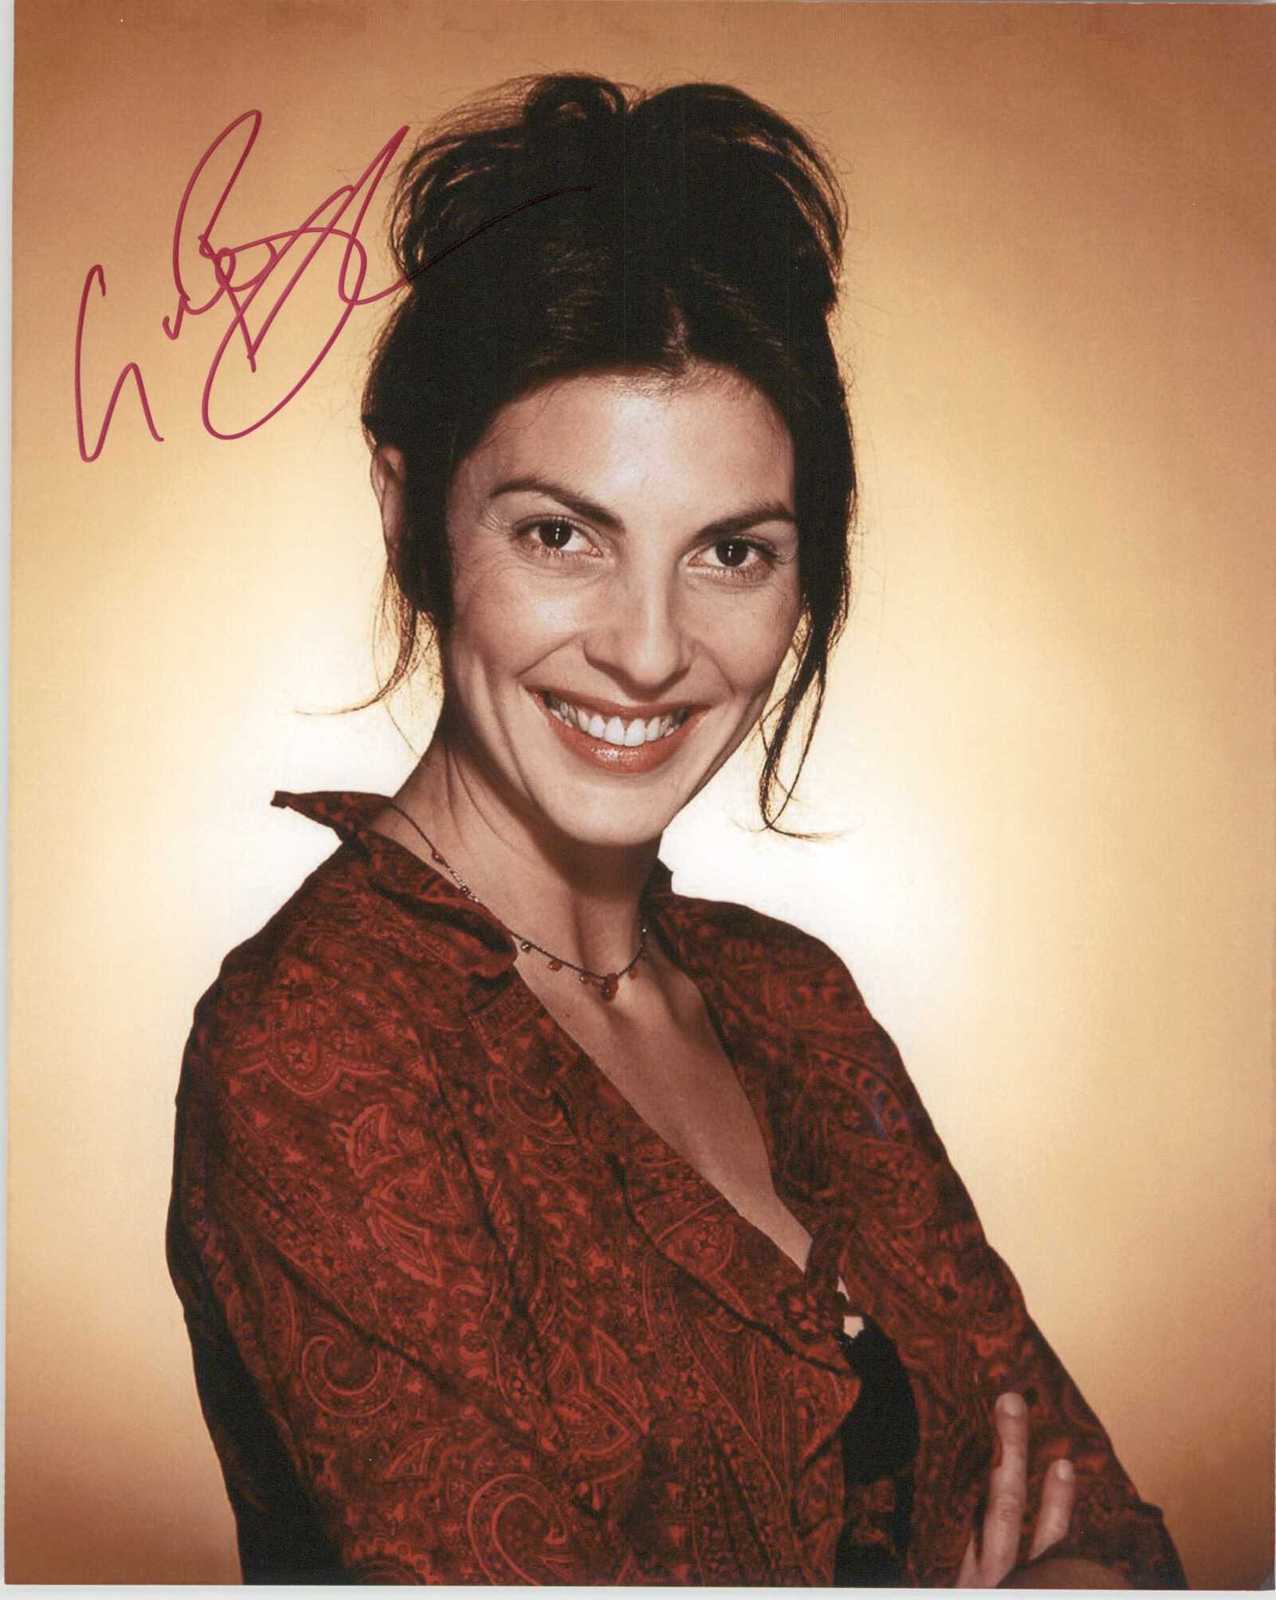 Gina Bellman Signed Autographed Glossy 8x10 Photo.